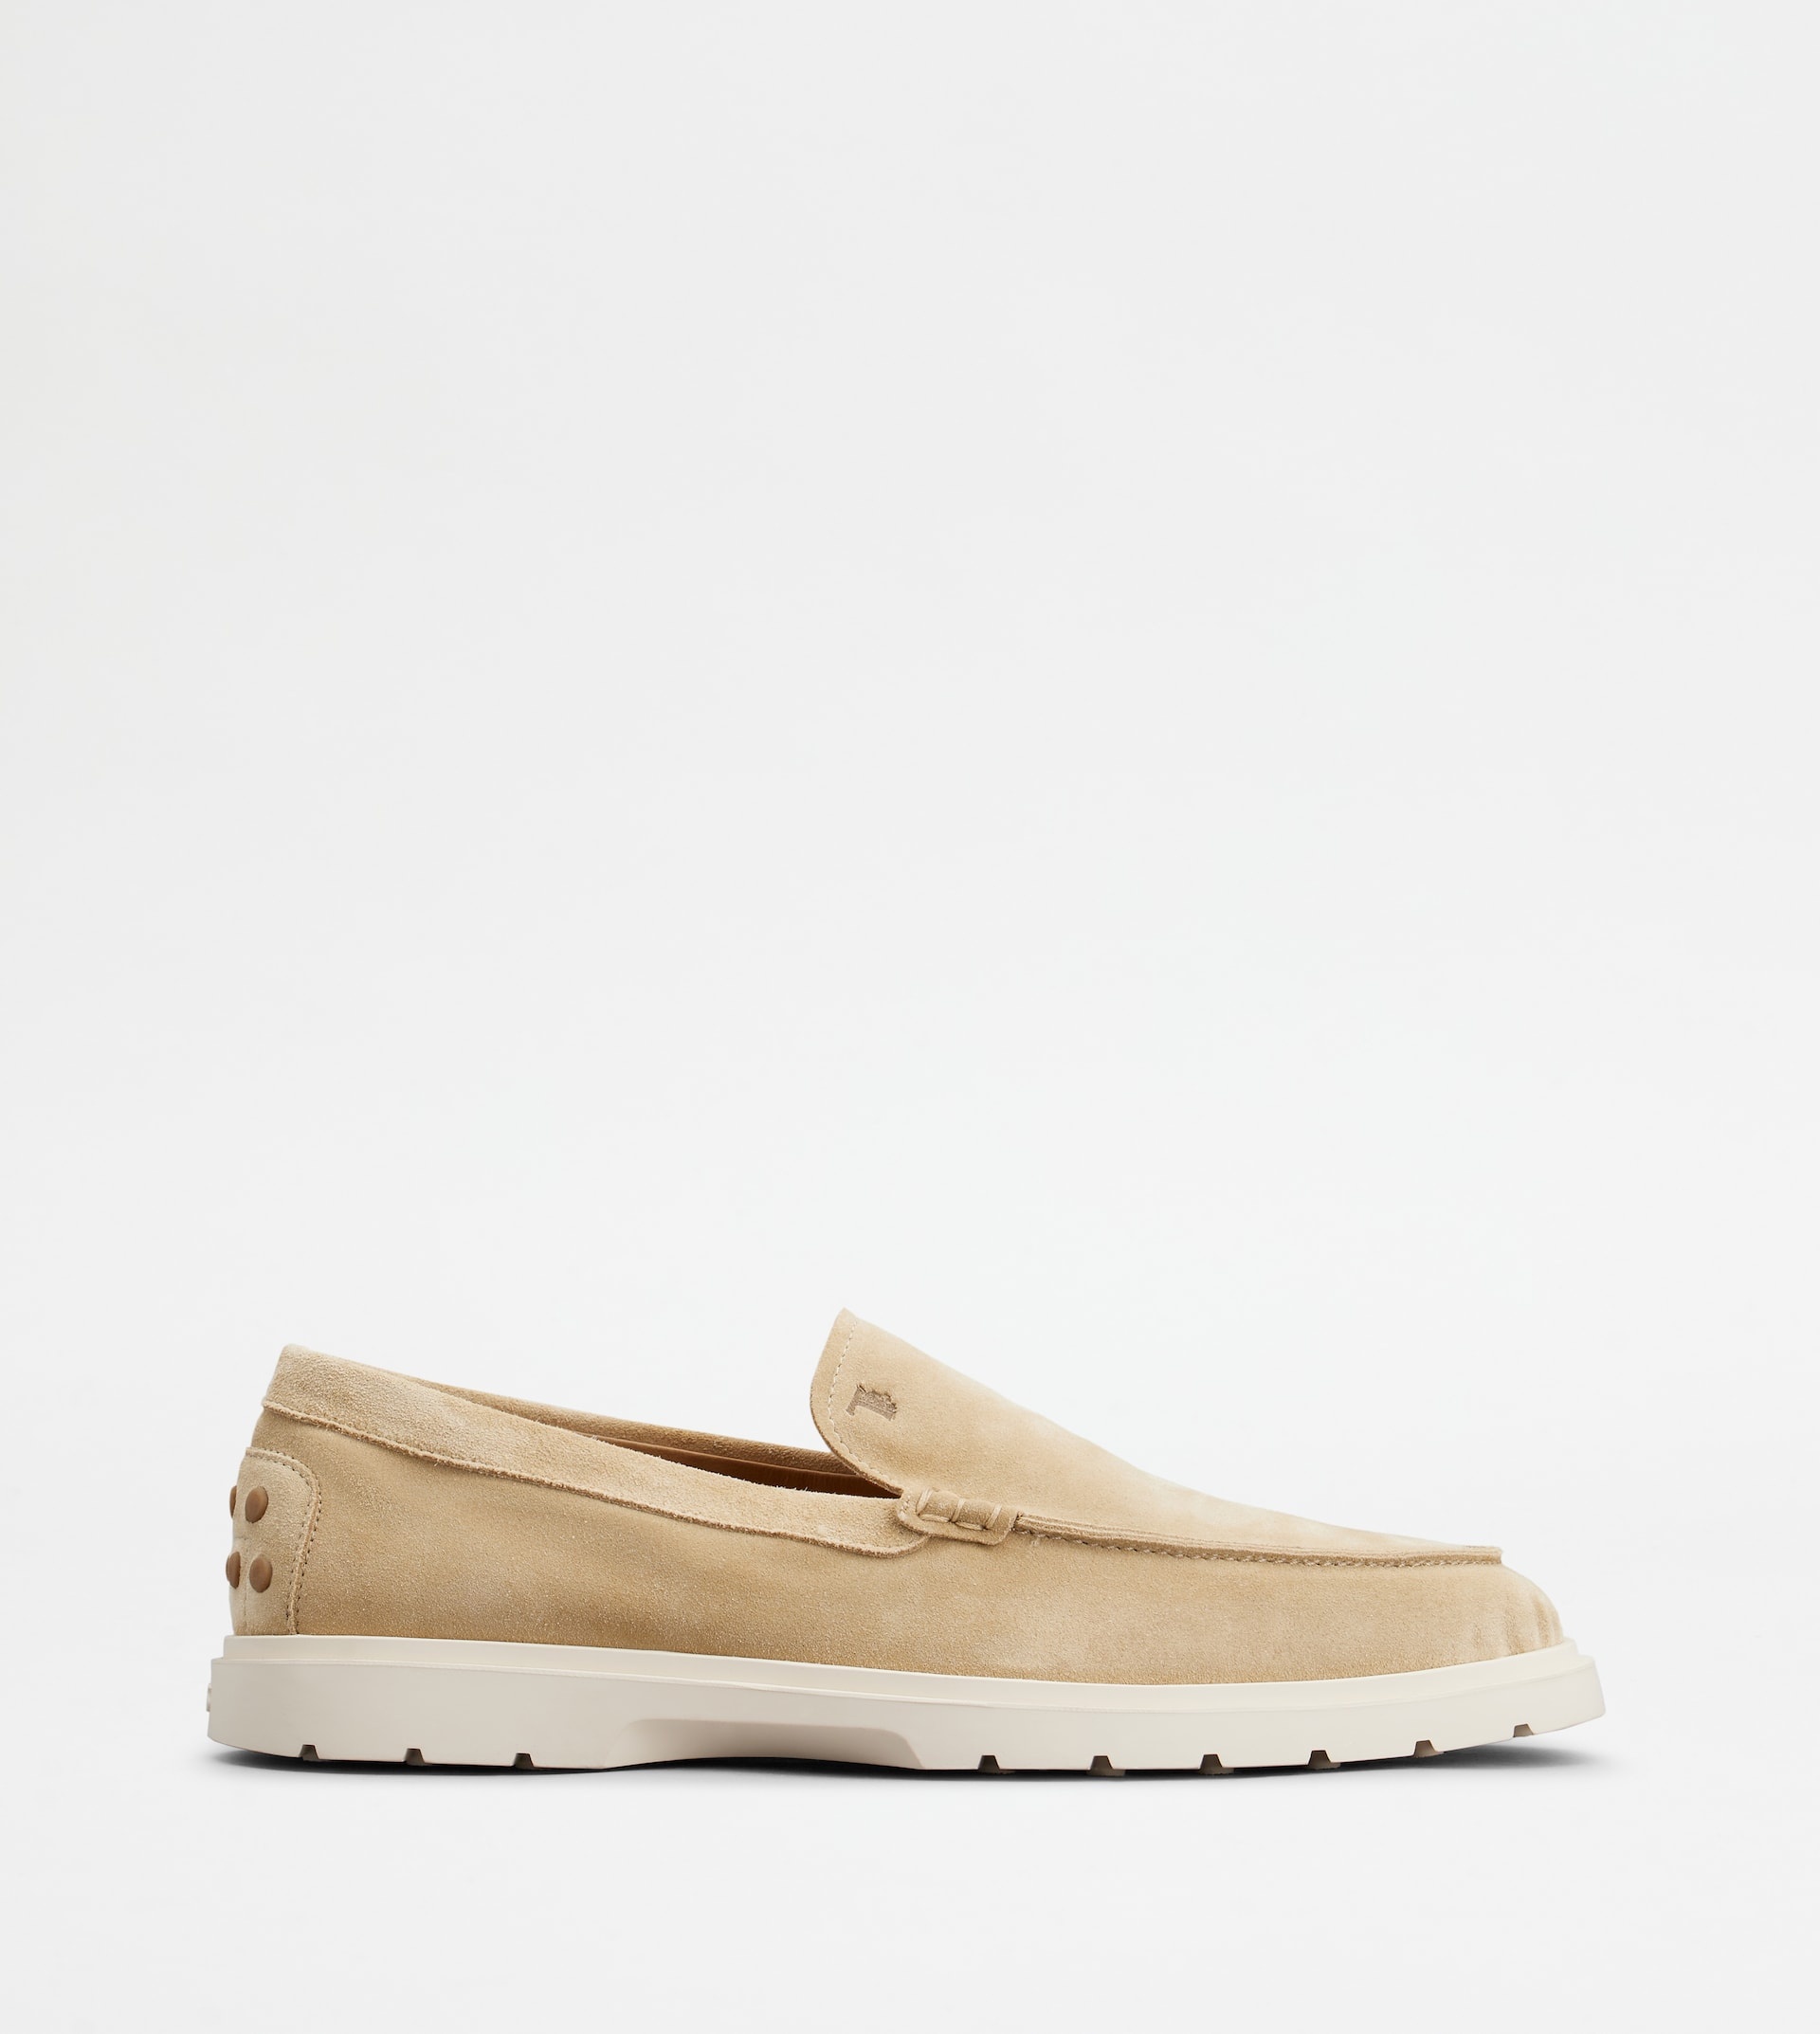 SLIPPER LOAFERS IN SUEDE - OFF WHITE - 1